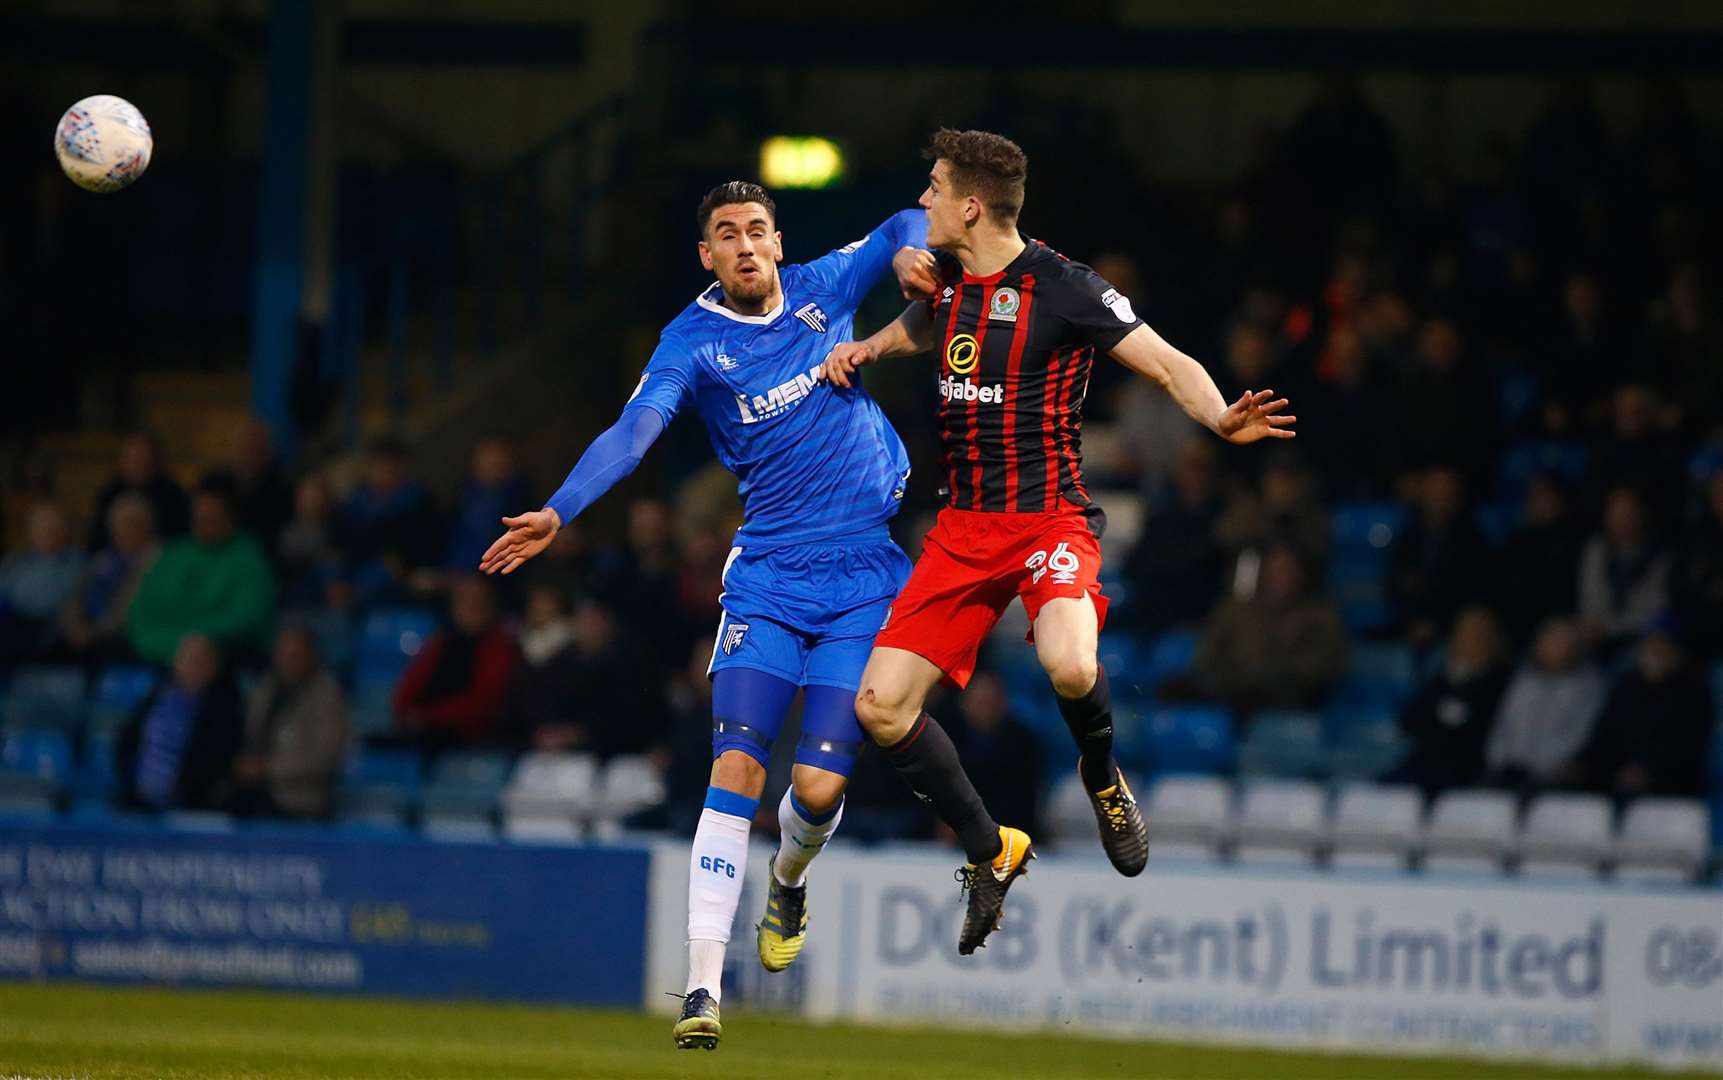 Gillingham's Conor Wilkinson and Blackburn Rovers' Darragh Lenihan battle for the ball Picture: Andy Jones